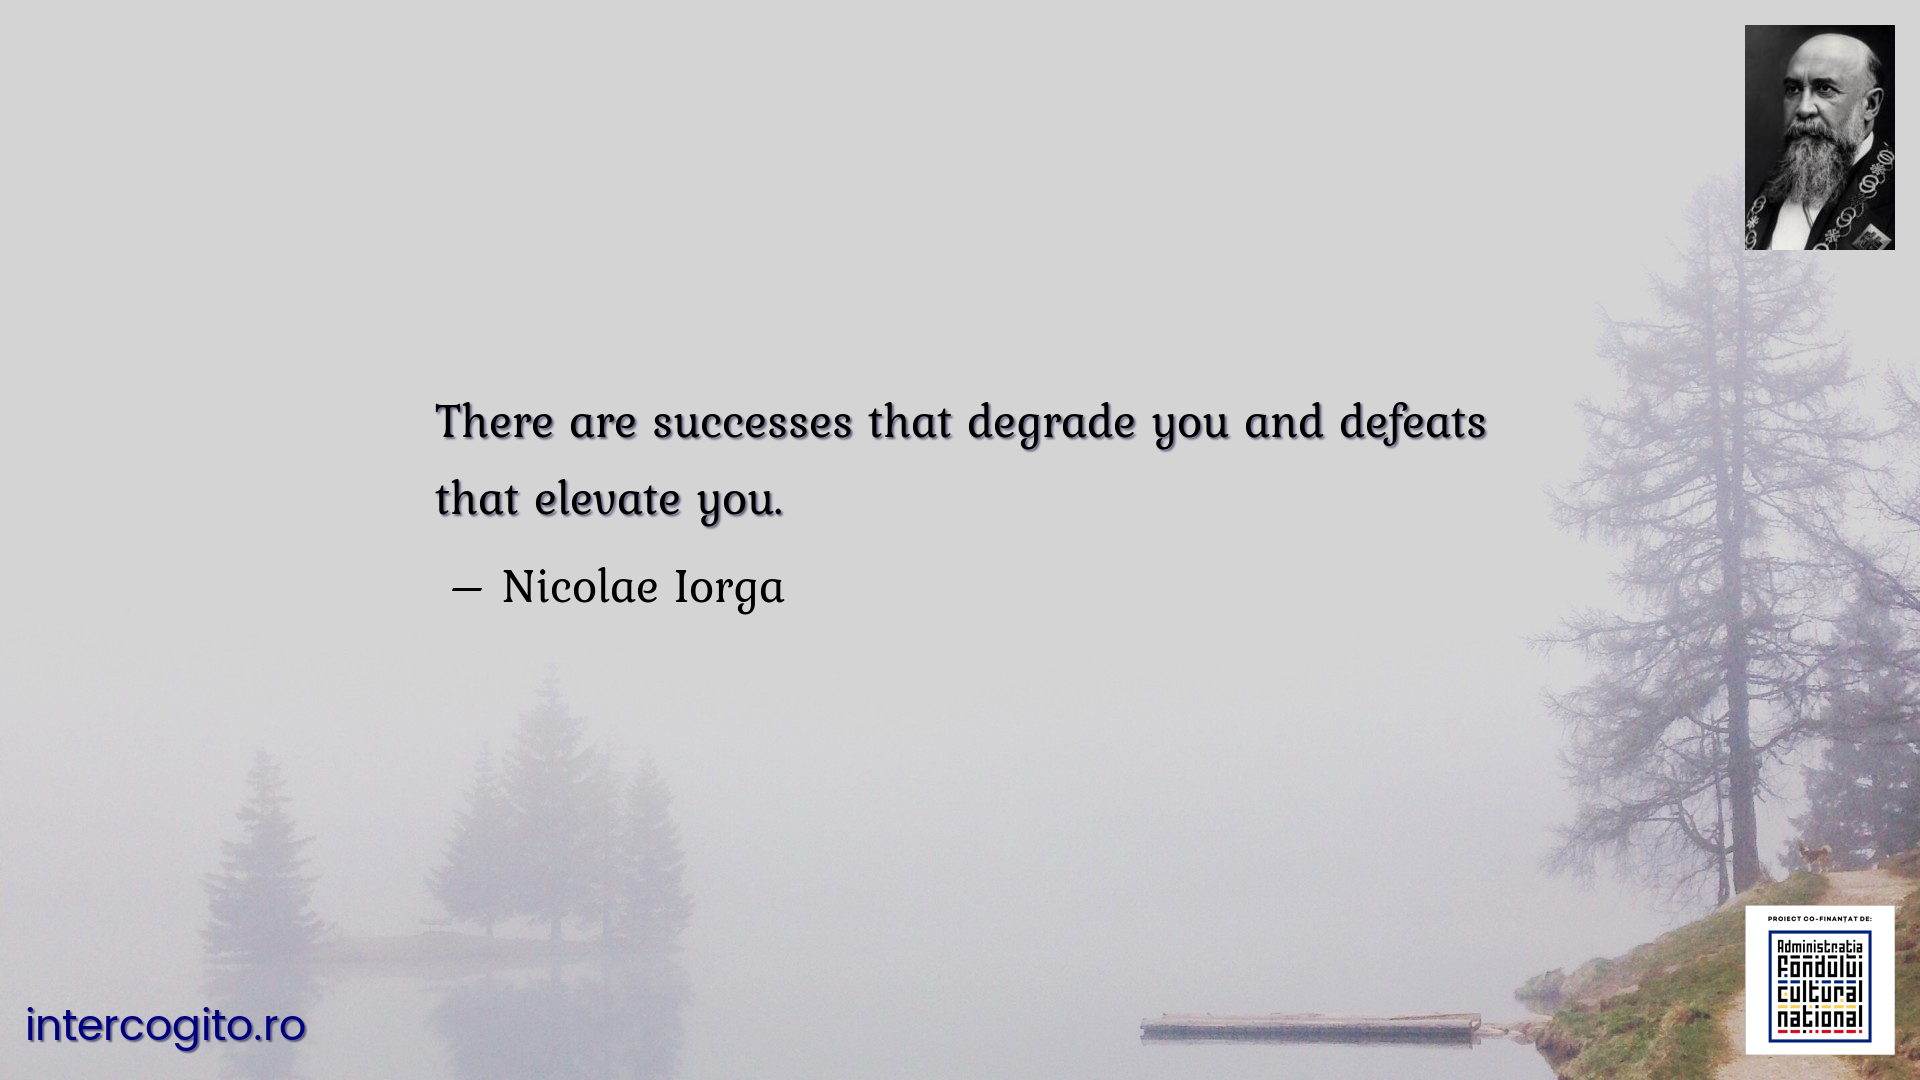 There are successes that degrade you and defeats that elevate you.